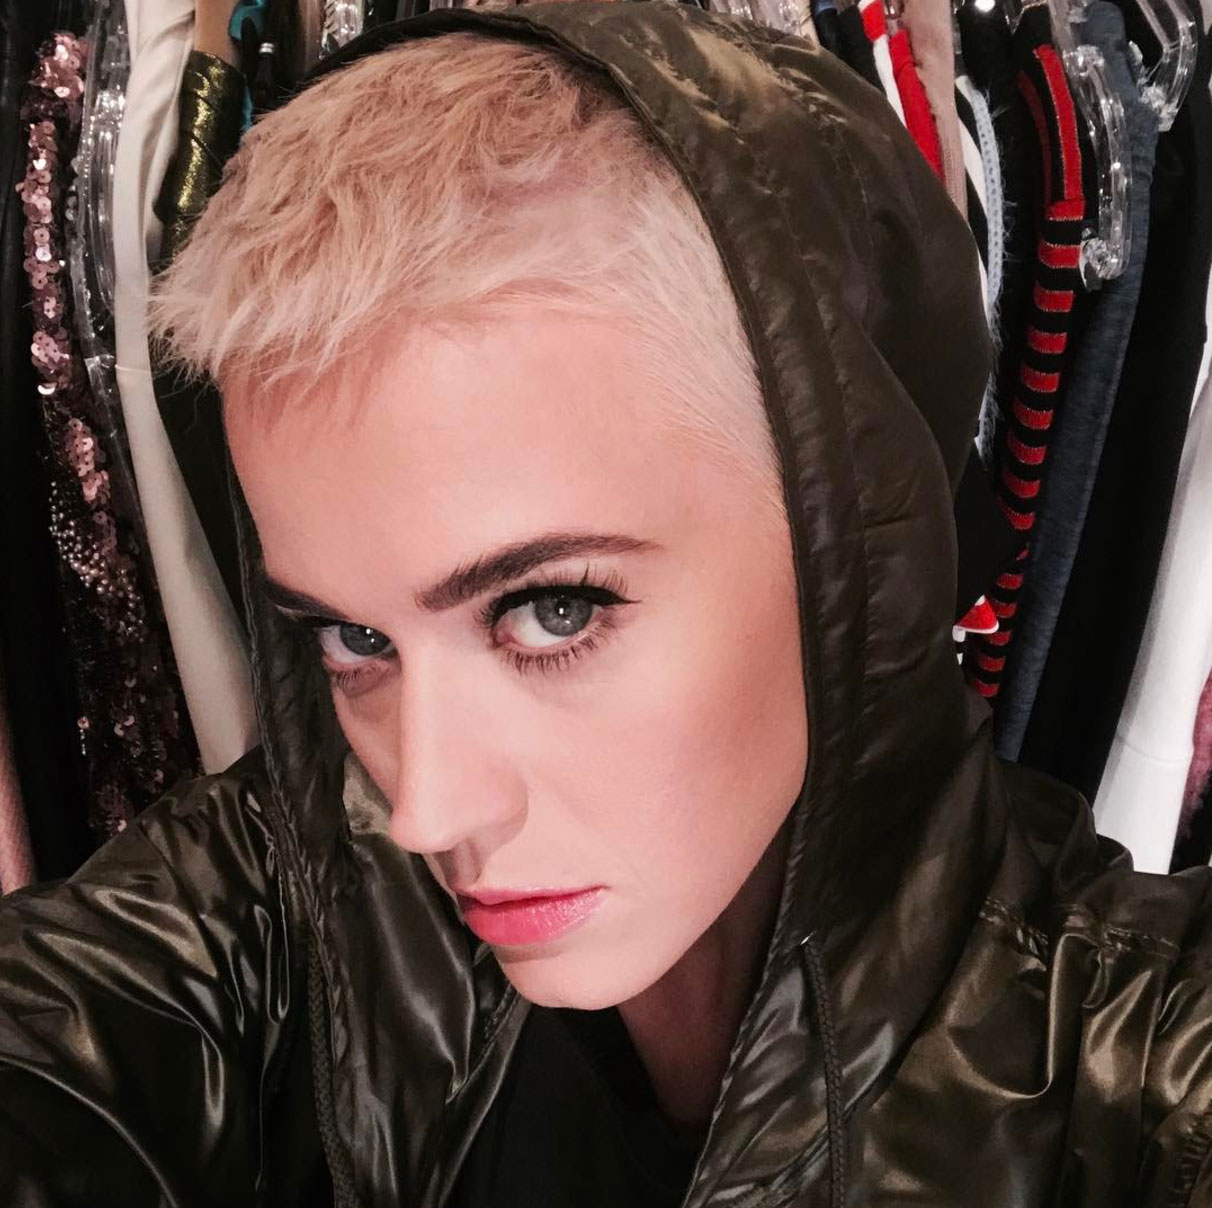 Katy Perry Cuts Off Even More Hair! See Her Almost Buzzed Look1212 x 1208